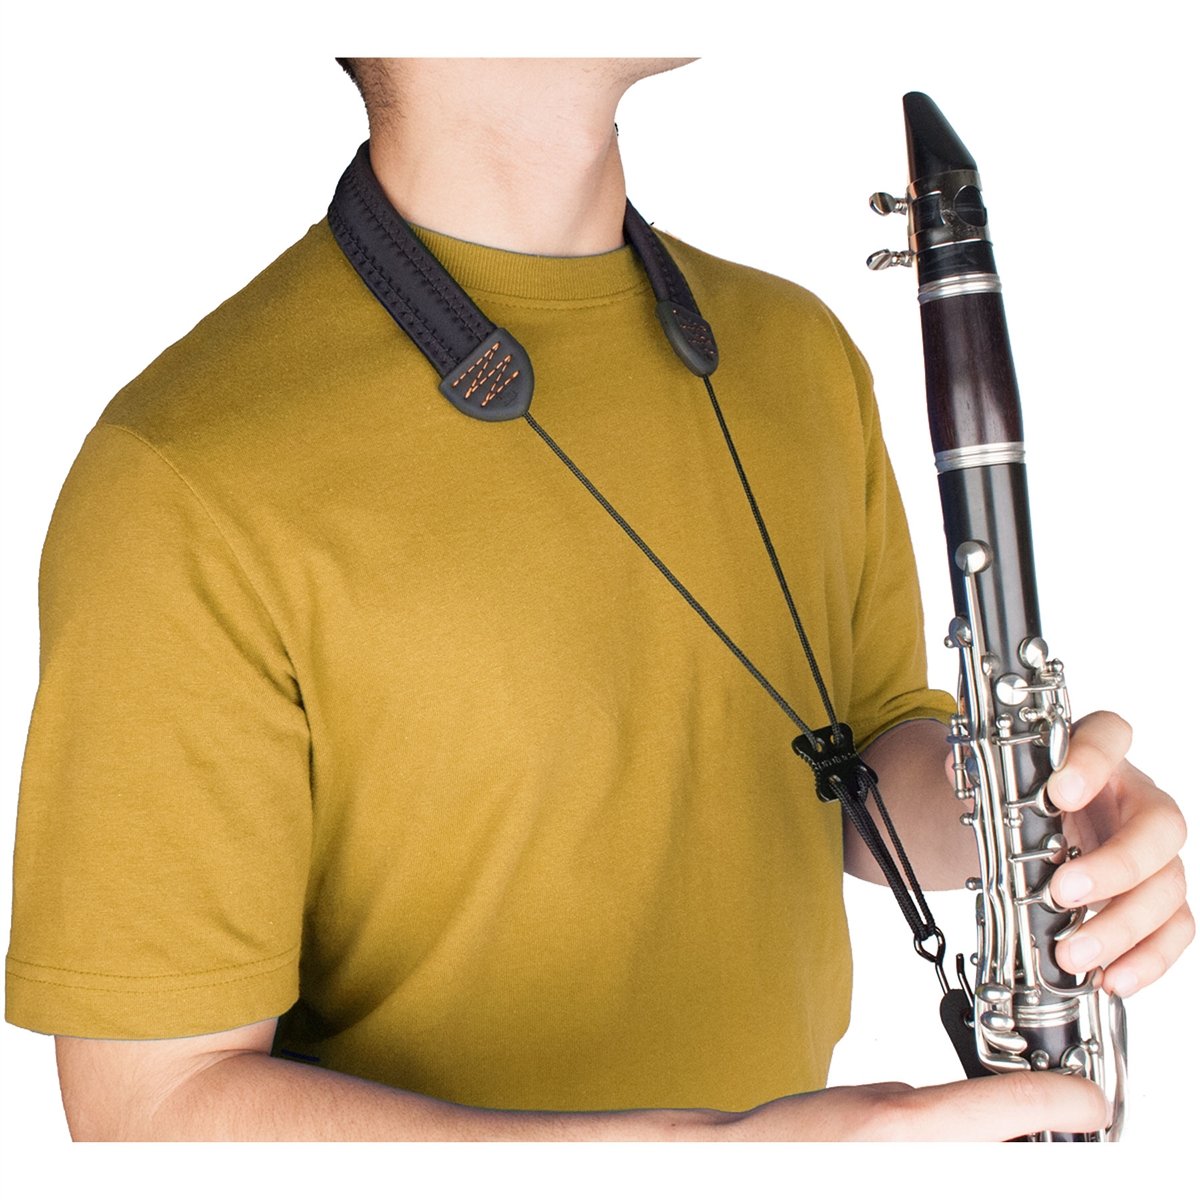 Protec - 22â€³ (Adult) Clarinet Neck Strap with Non-Elastic Cord-Accessories-Protec-Music Elements